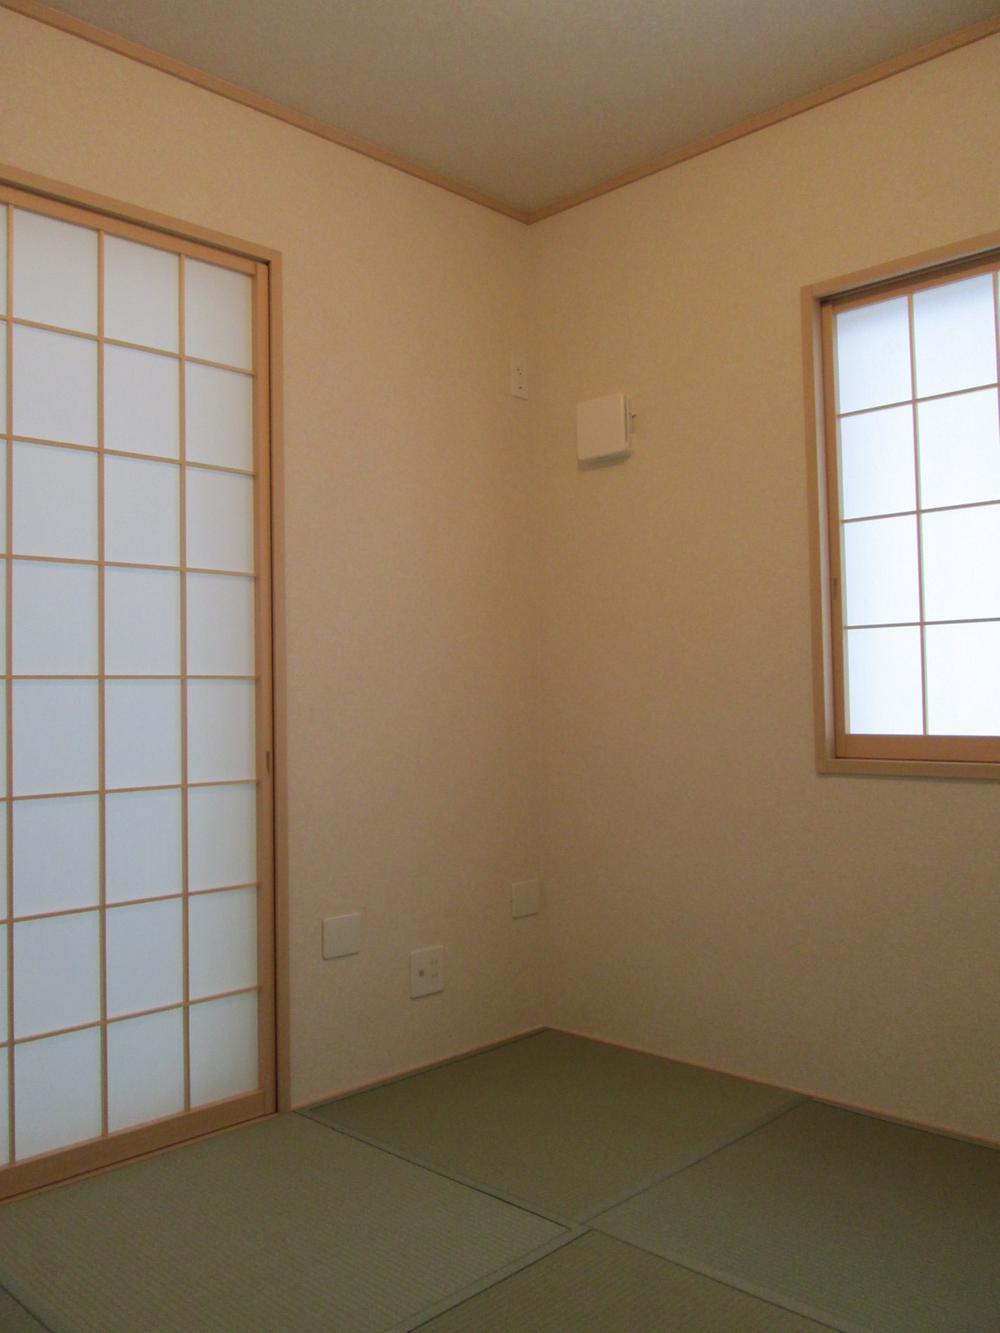 Non-living room. I hope there is also a bright Japanese-style room.